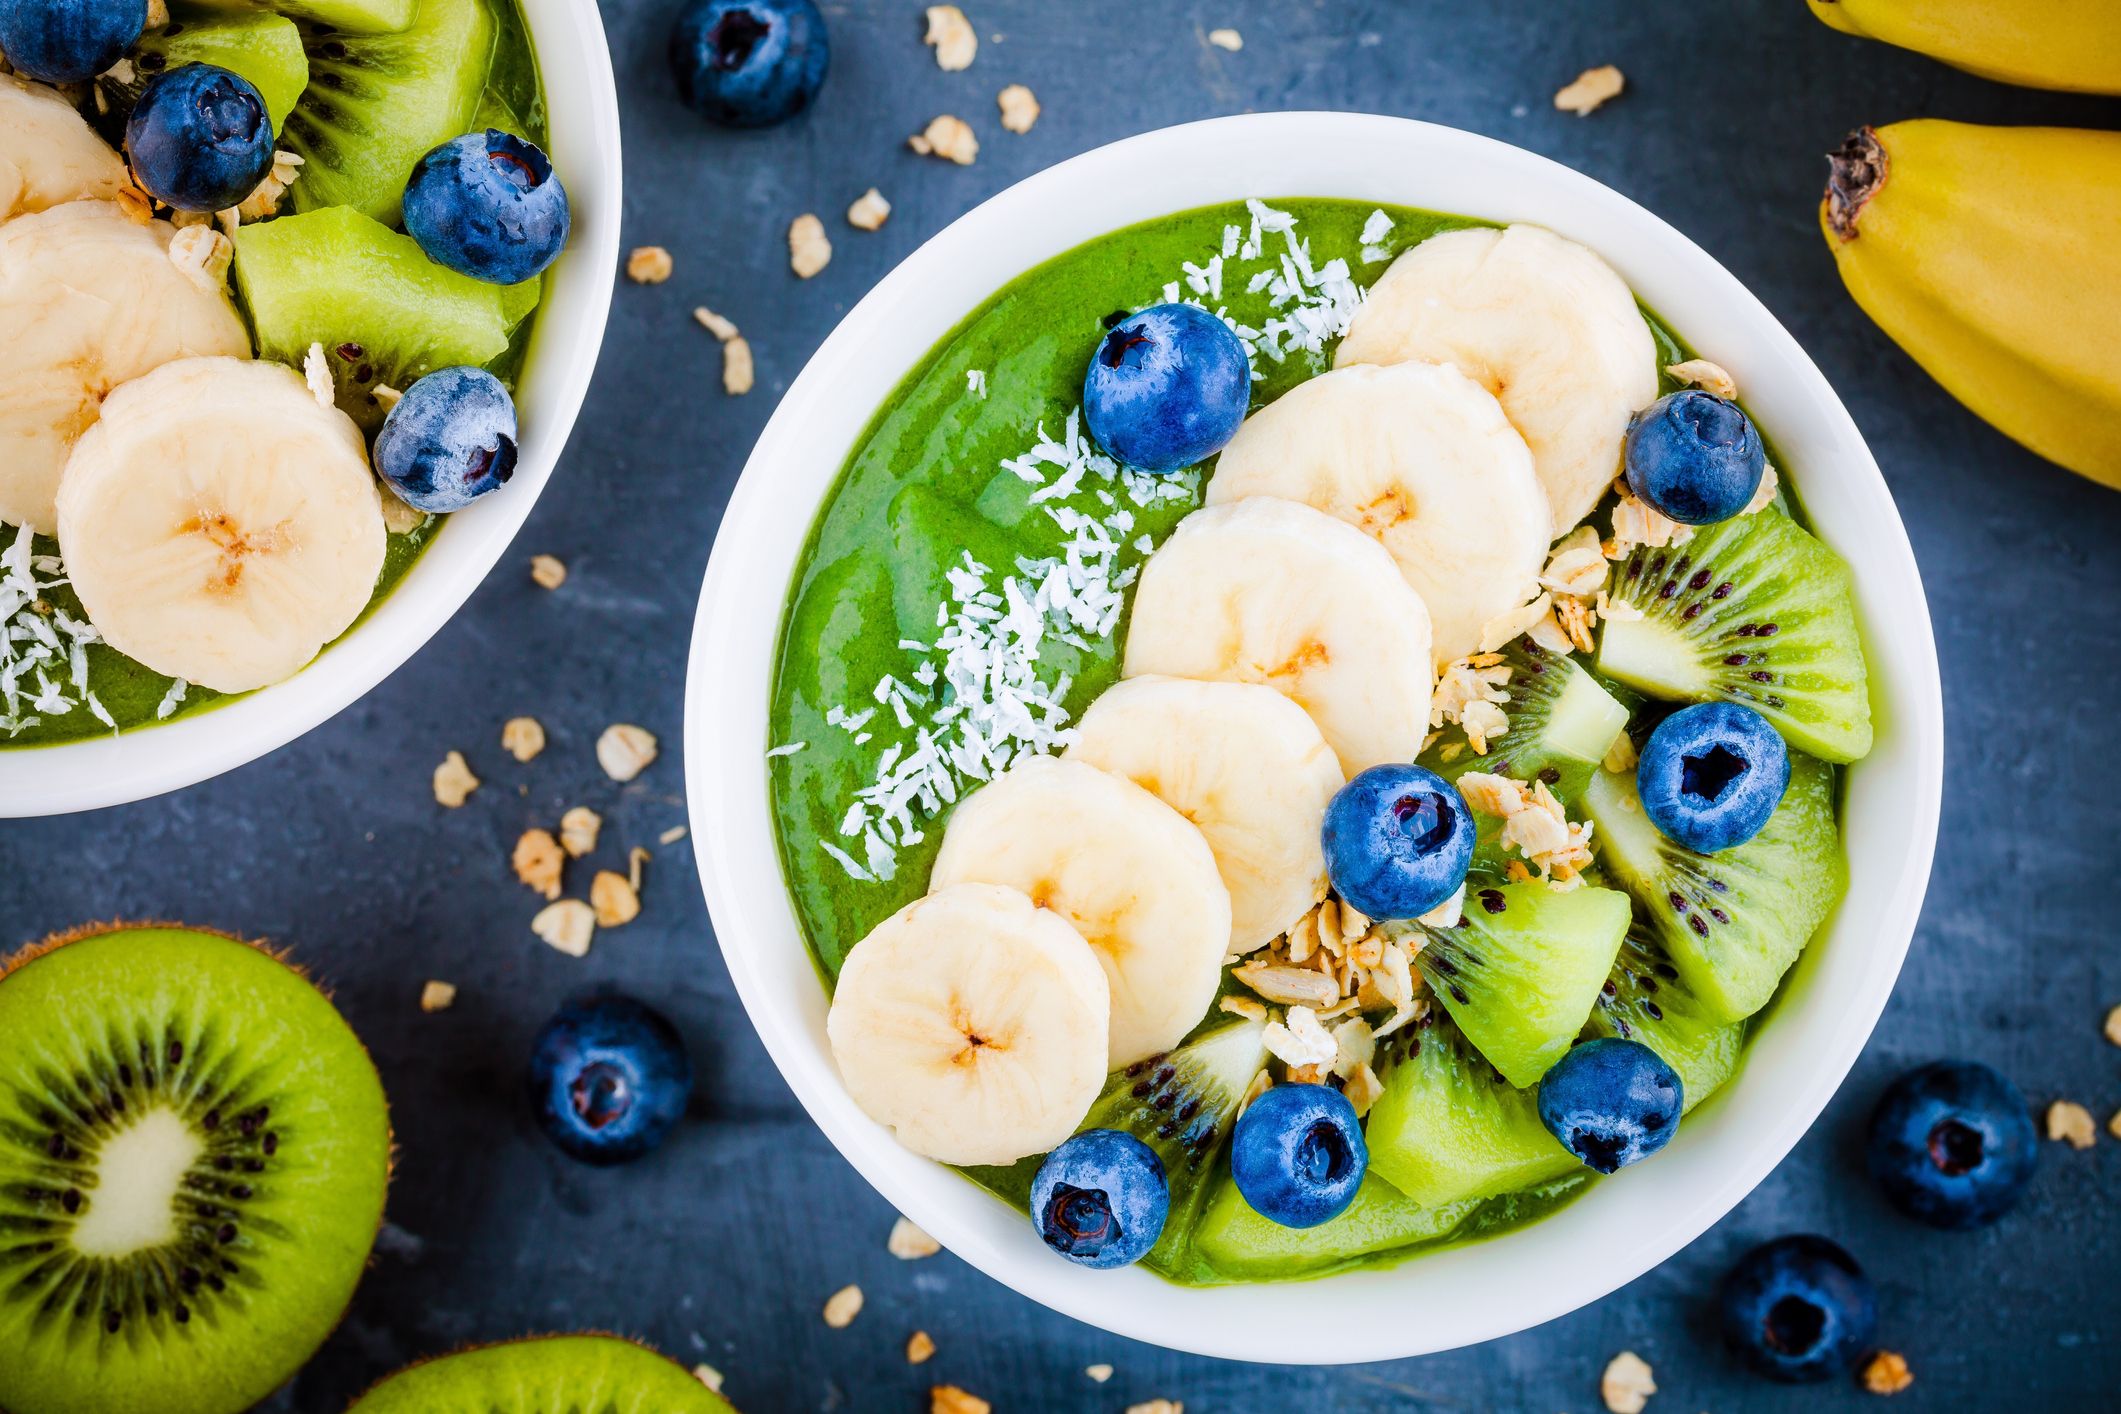 https://hips.hearstapps.com/hmg-prod/images/green-smoothie-bowl-with-banana-kiwi-blueberry-royalty-free-image-1575309438.jpg